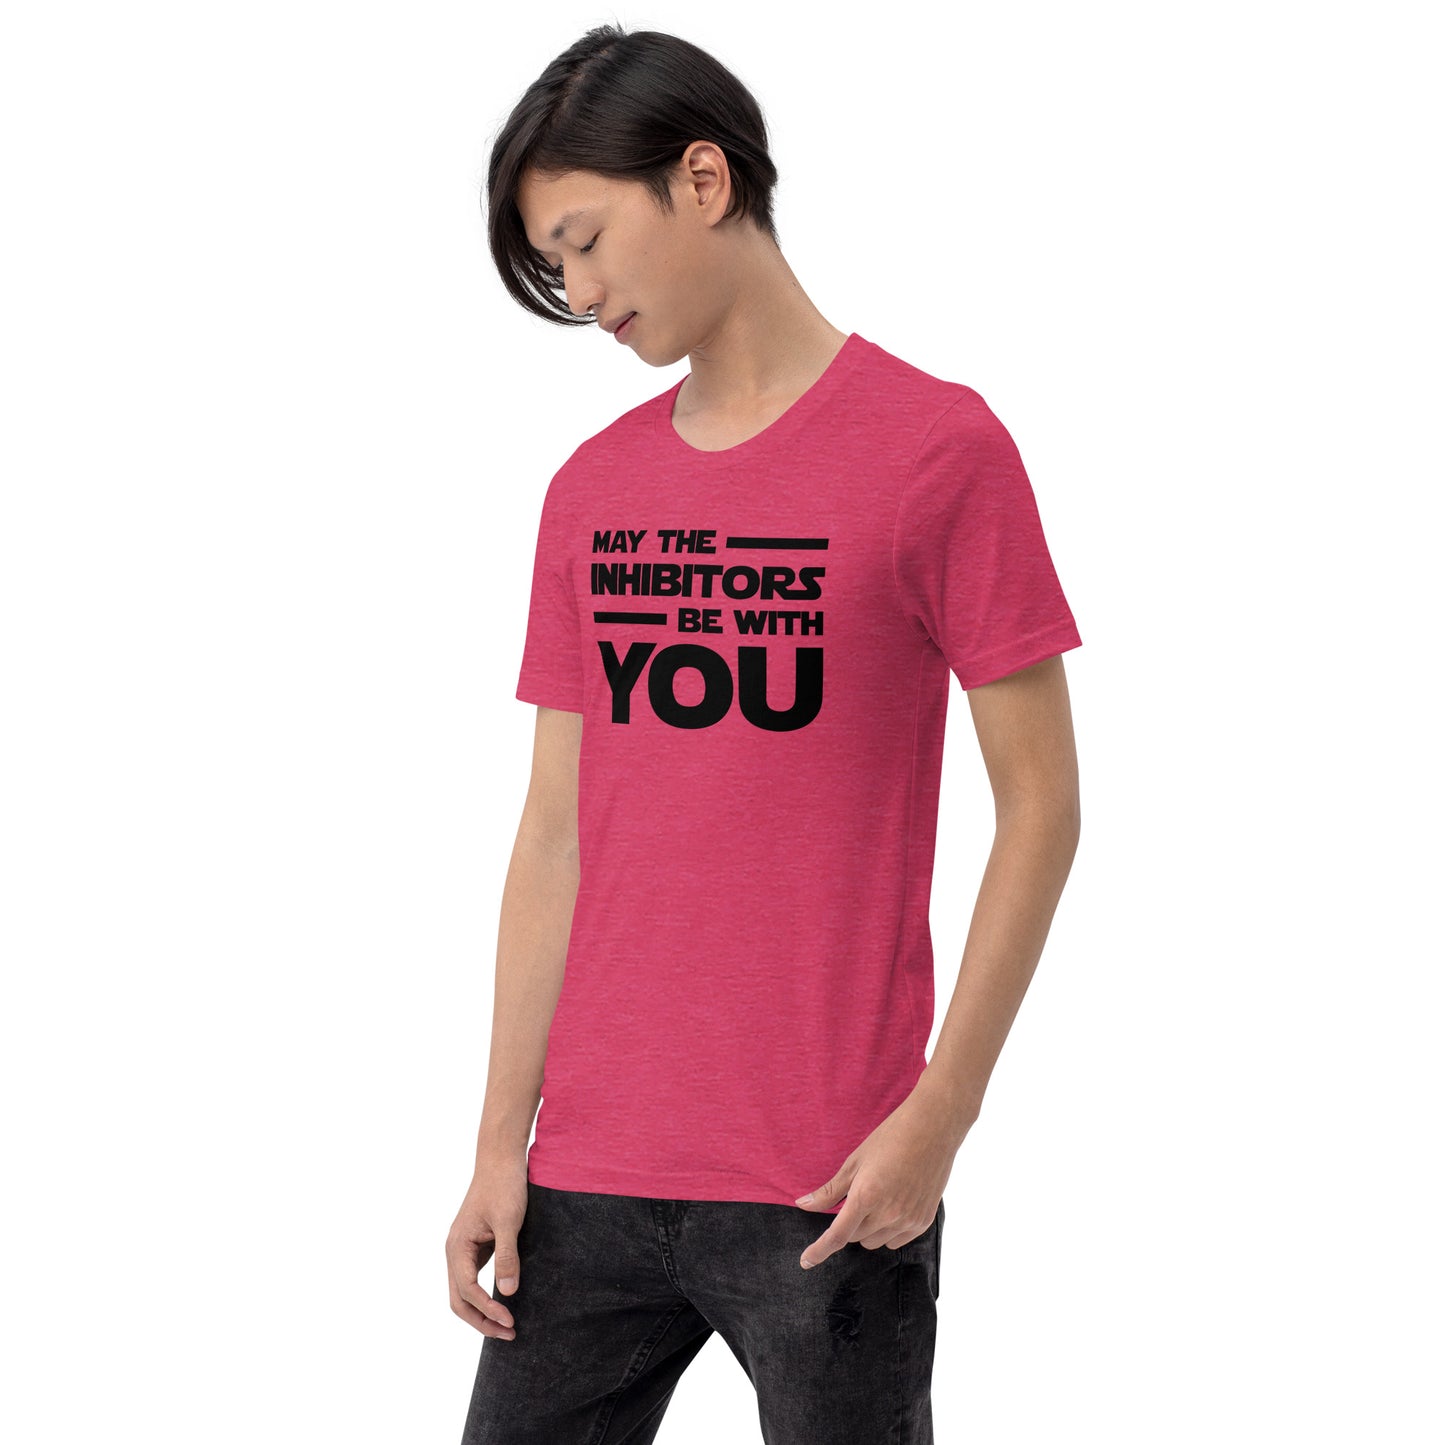 May The Inhibitors Be With You Unisex Short Sleeve T-shirt